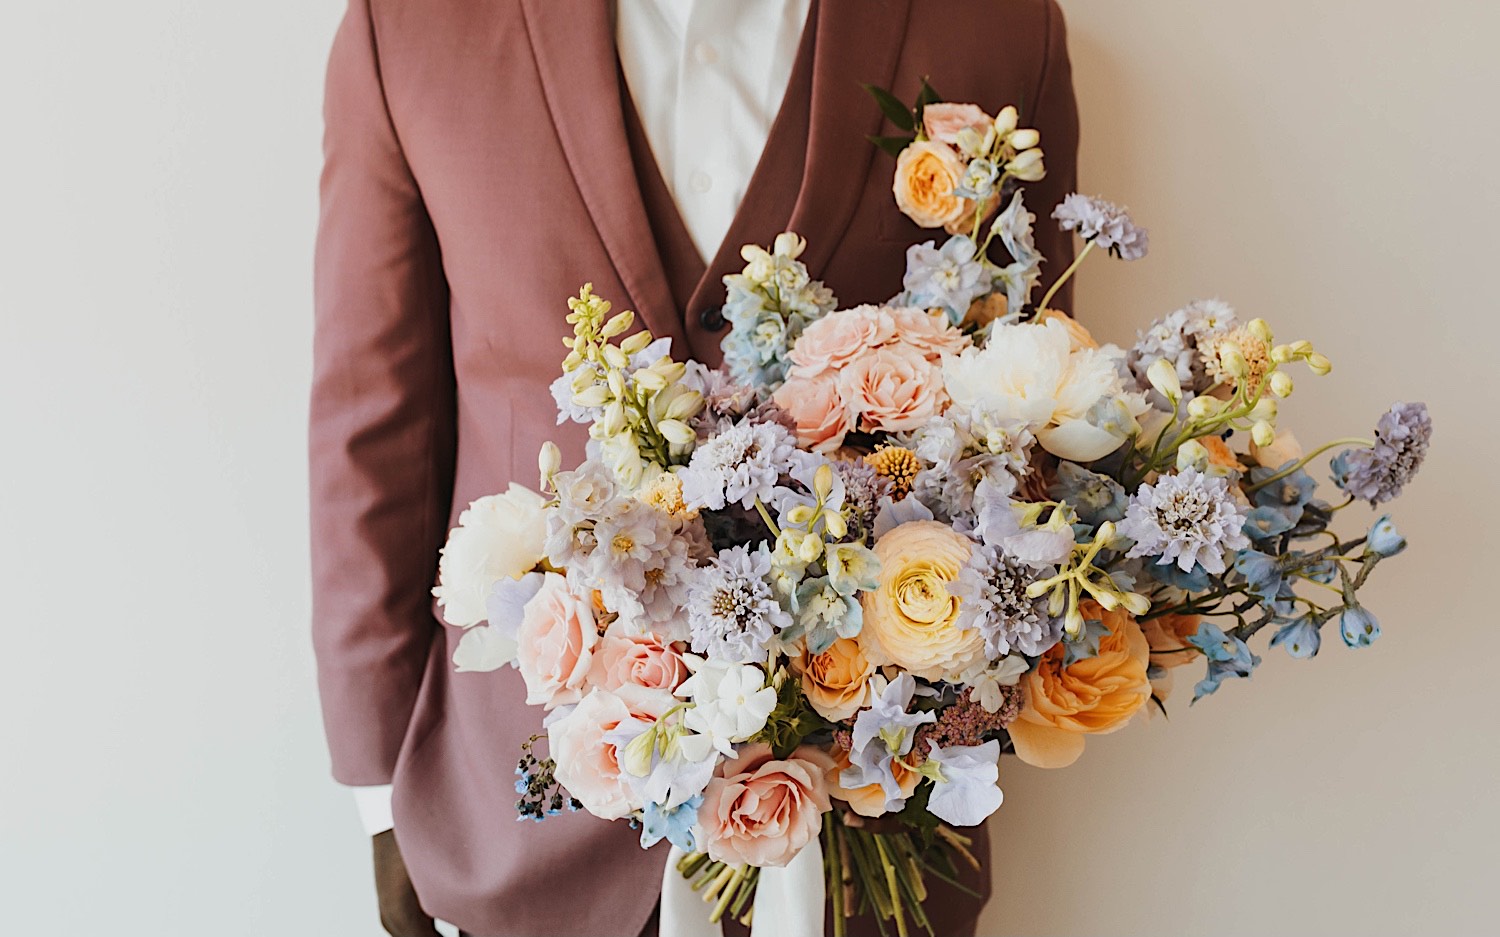 Torso photo of a groom standing and holding a flower bouquet towards the camera